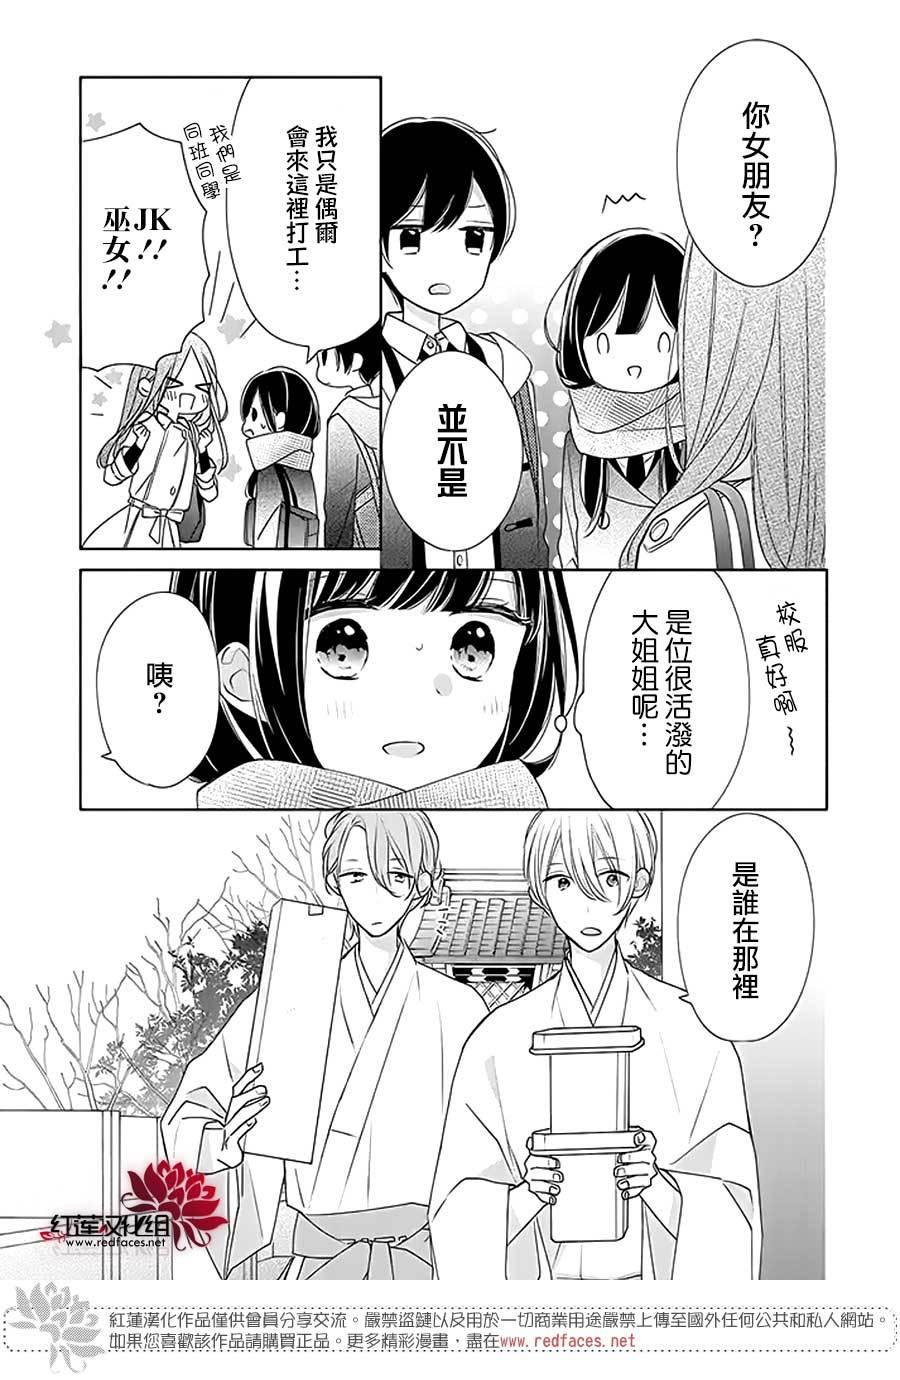 If given a second chance - 26話 - 3